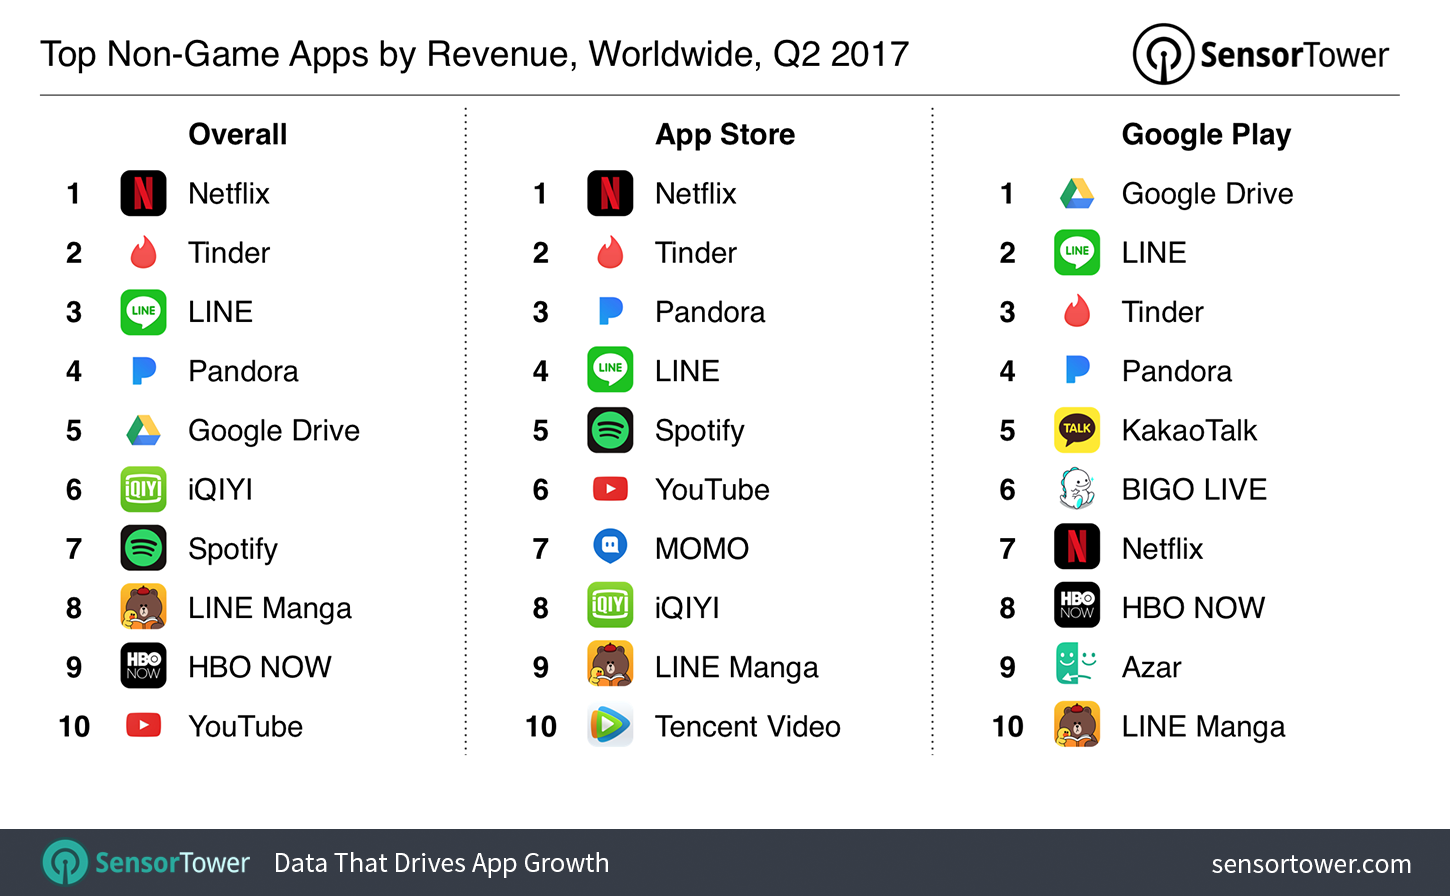 Q2 2017's Top Mobile Apps by Worldwide Revenue